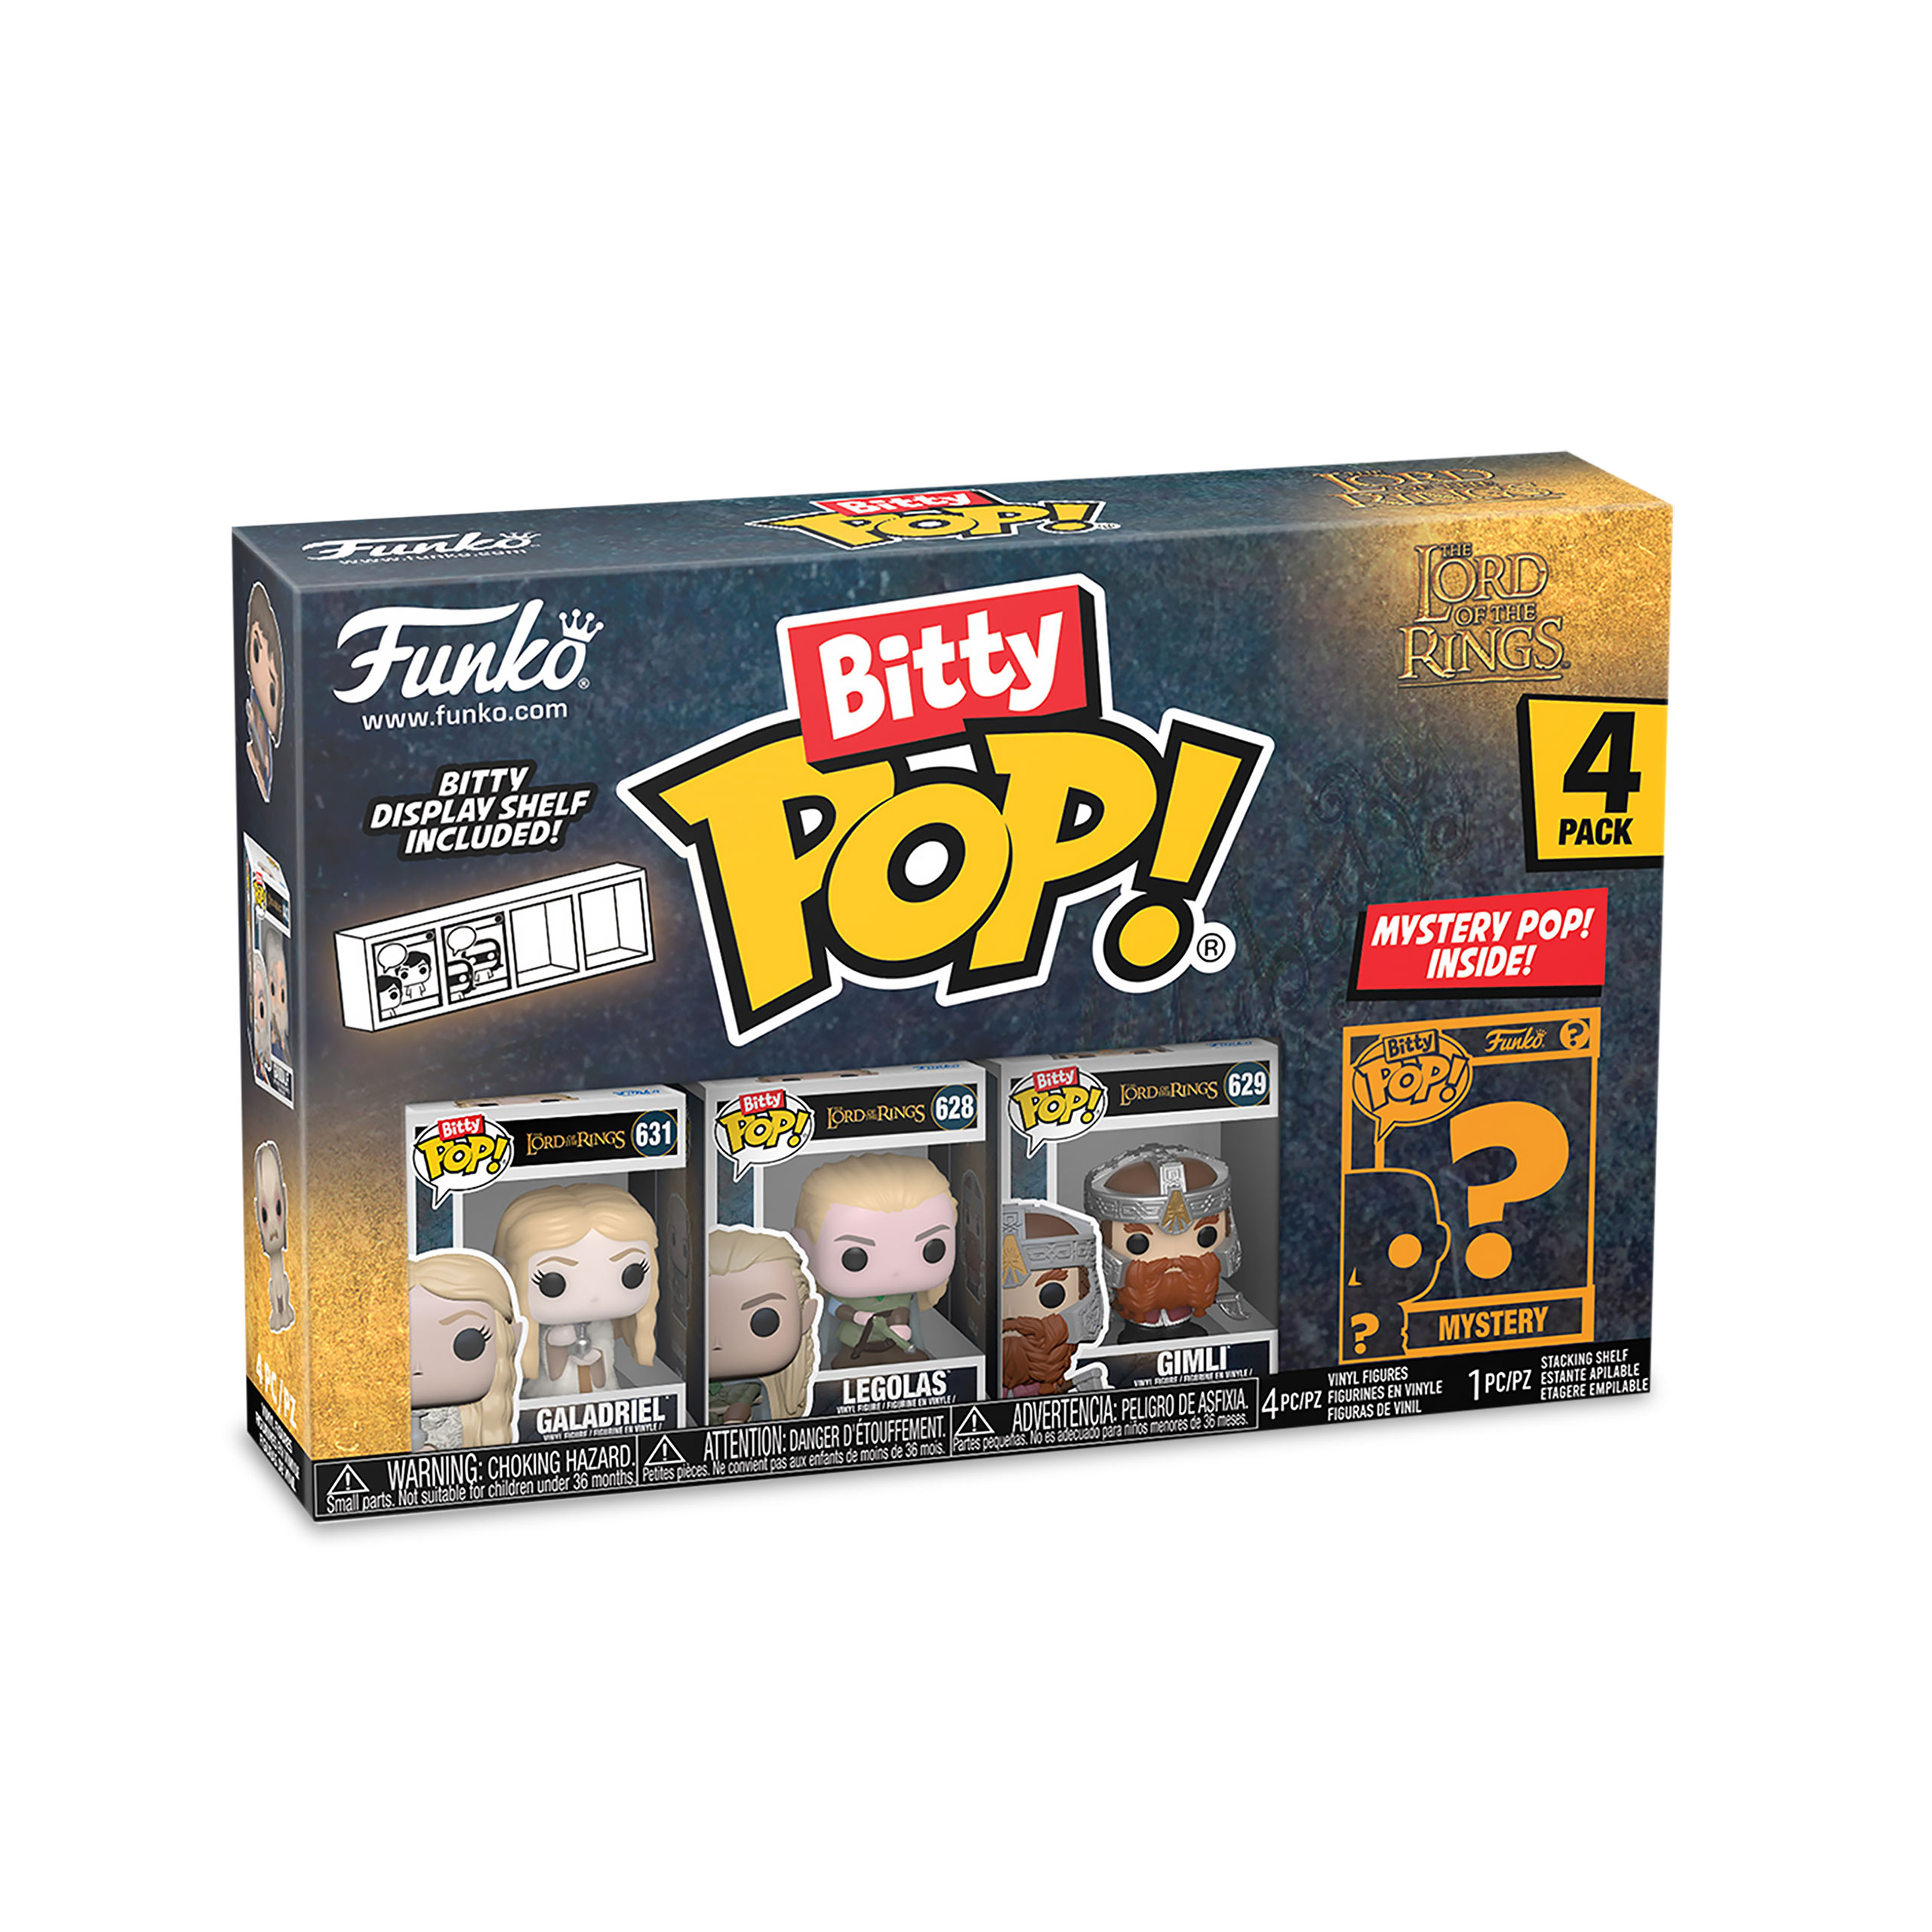 Lord of the Rings - Funko Bitty Pop 4-piece Figure Set Series 2